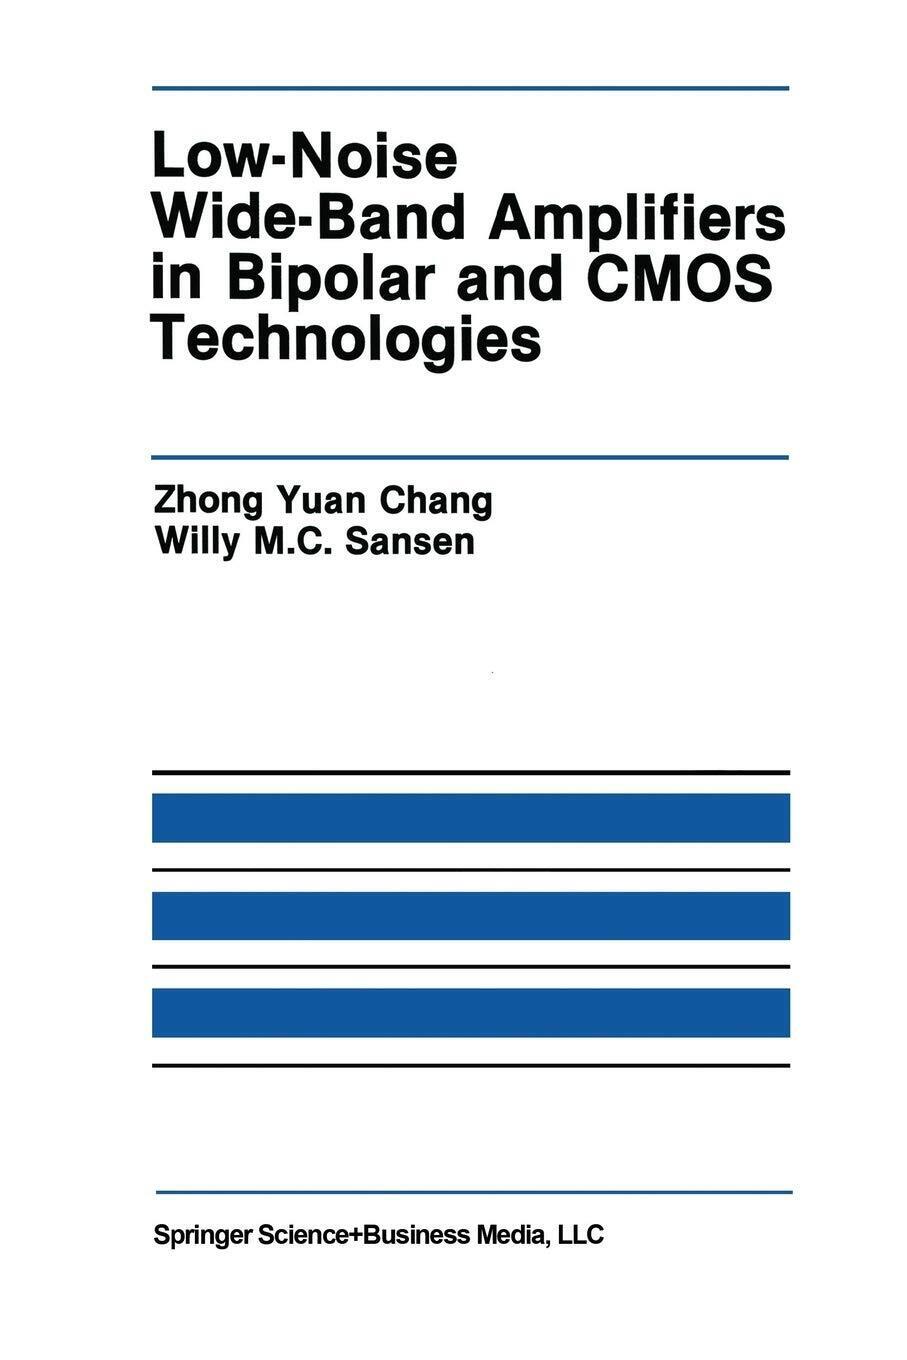 Low-noise Wide-band Amplifiers in Bipolar and Cmos Technologies - Springer, 2010